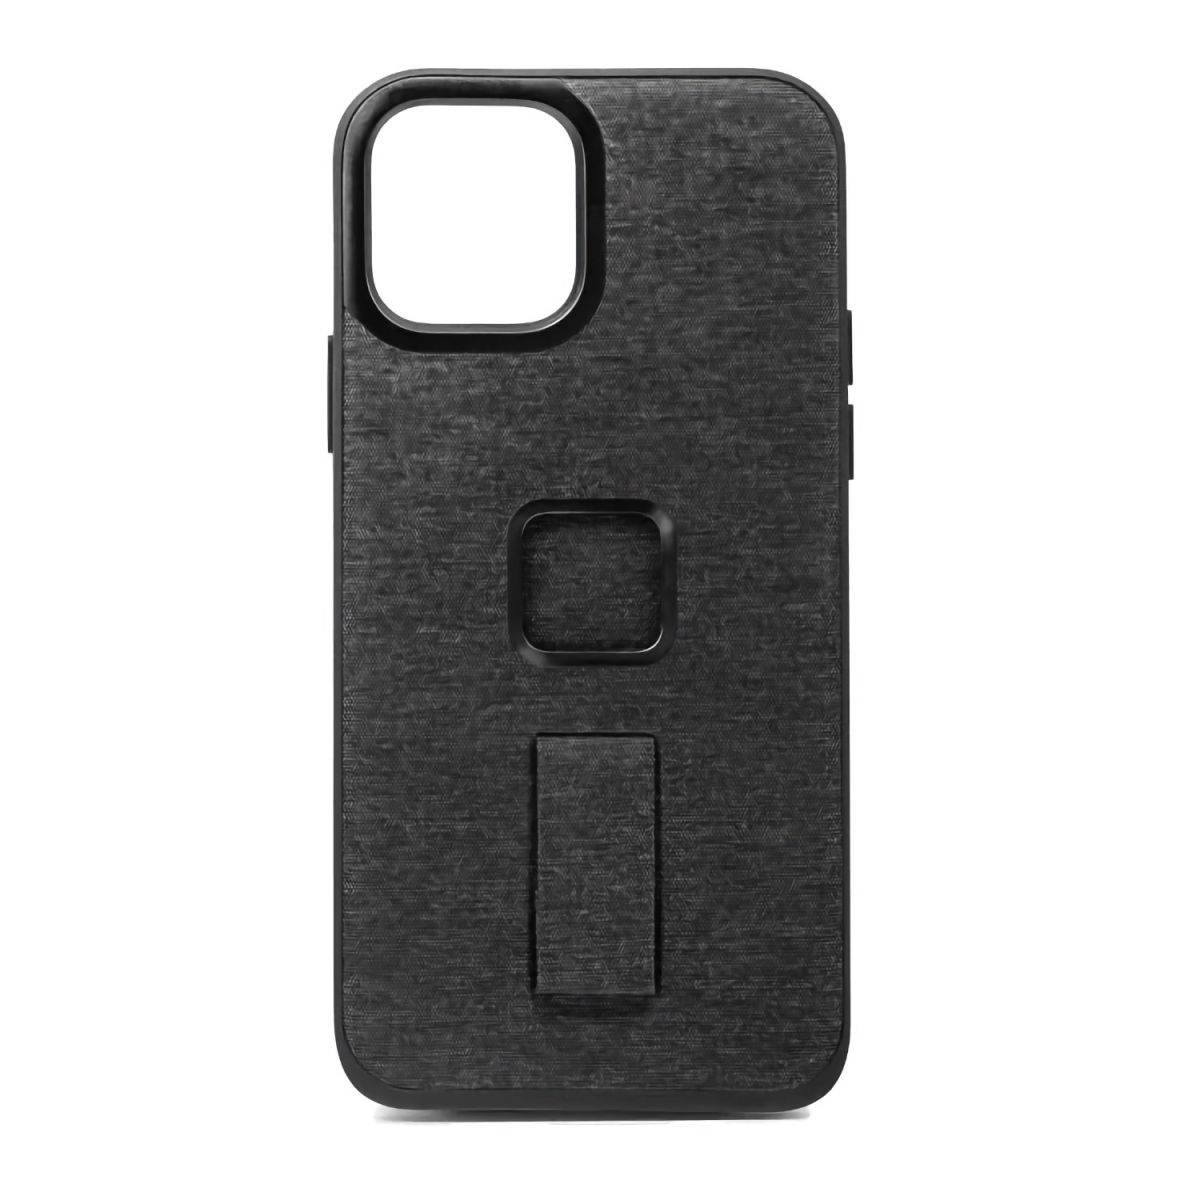 Peak Design Everyday Case for iPhone with Loop